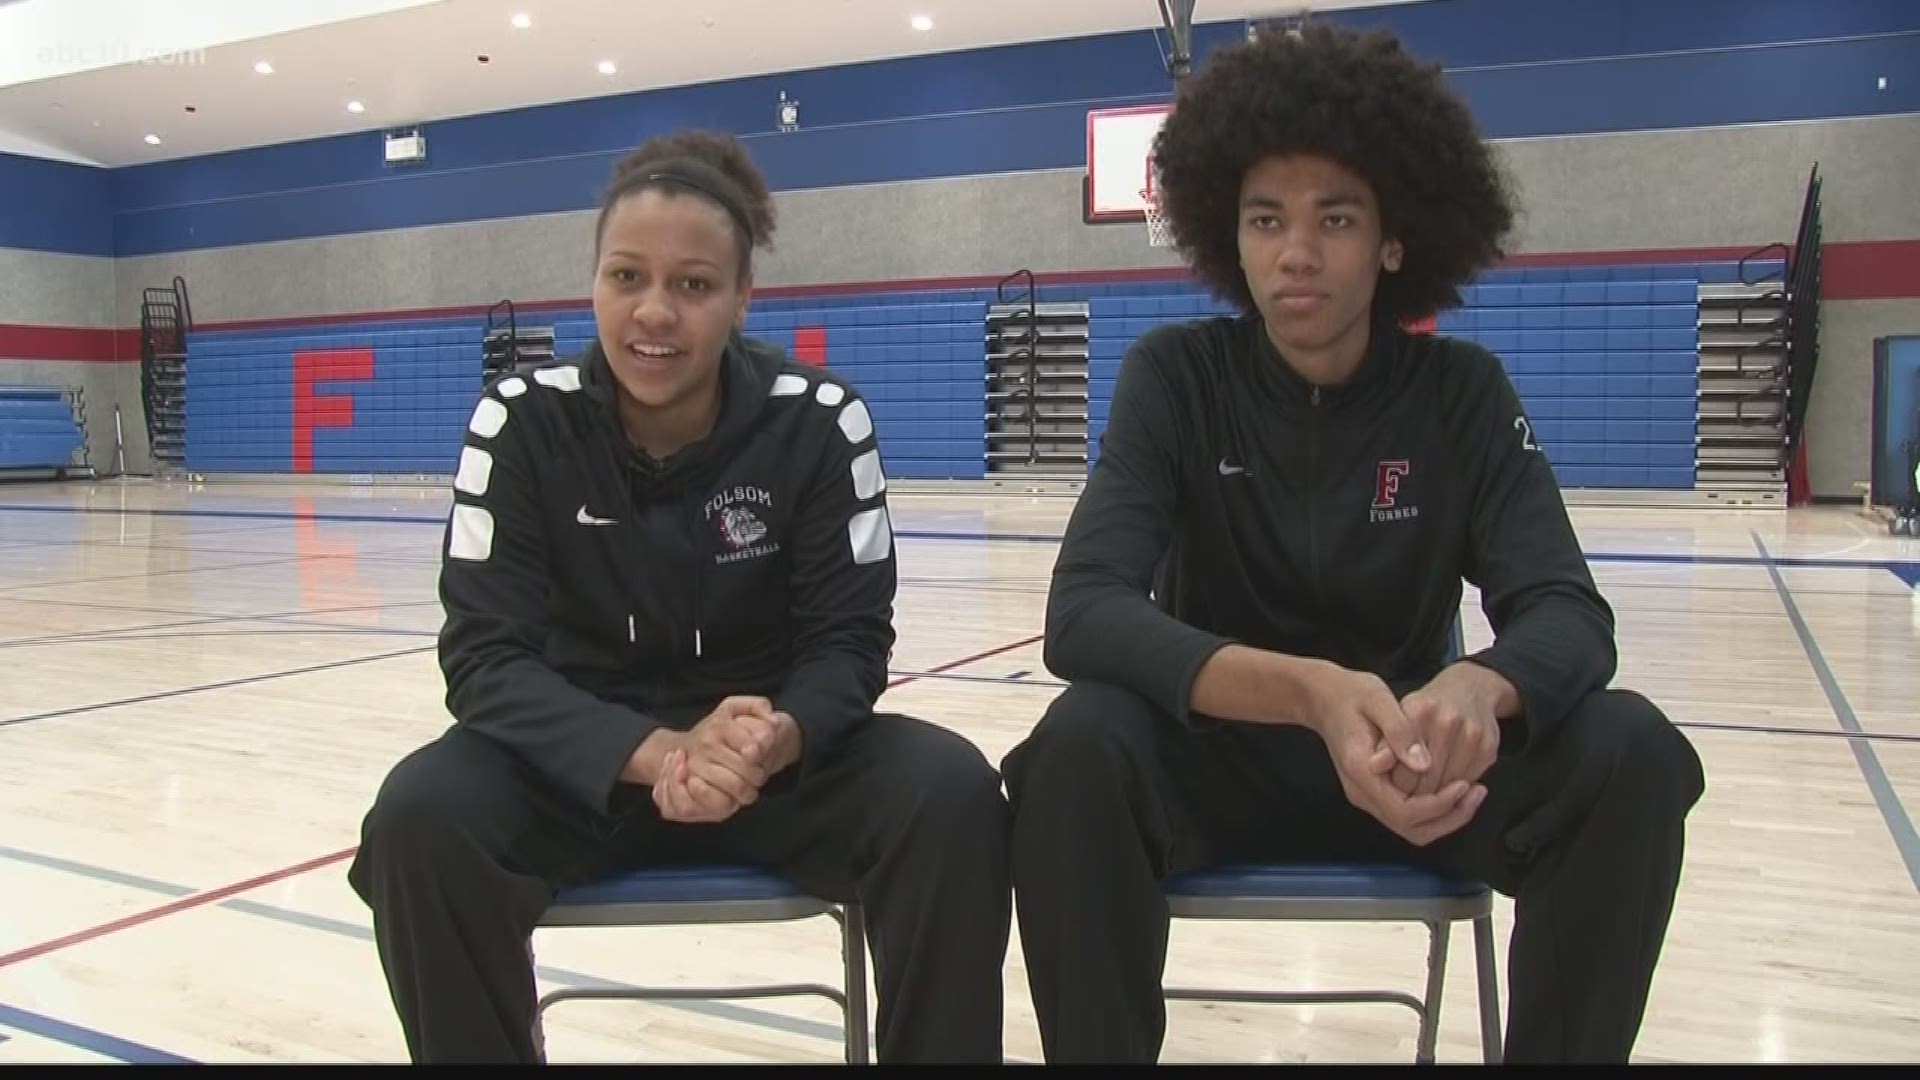 There are a number of famous siblings who have excelled on the basketball court but Folsom could be home to the next brother-sister pair to get some of that of hoops hype. (Feb. 15, 2018)